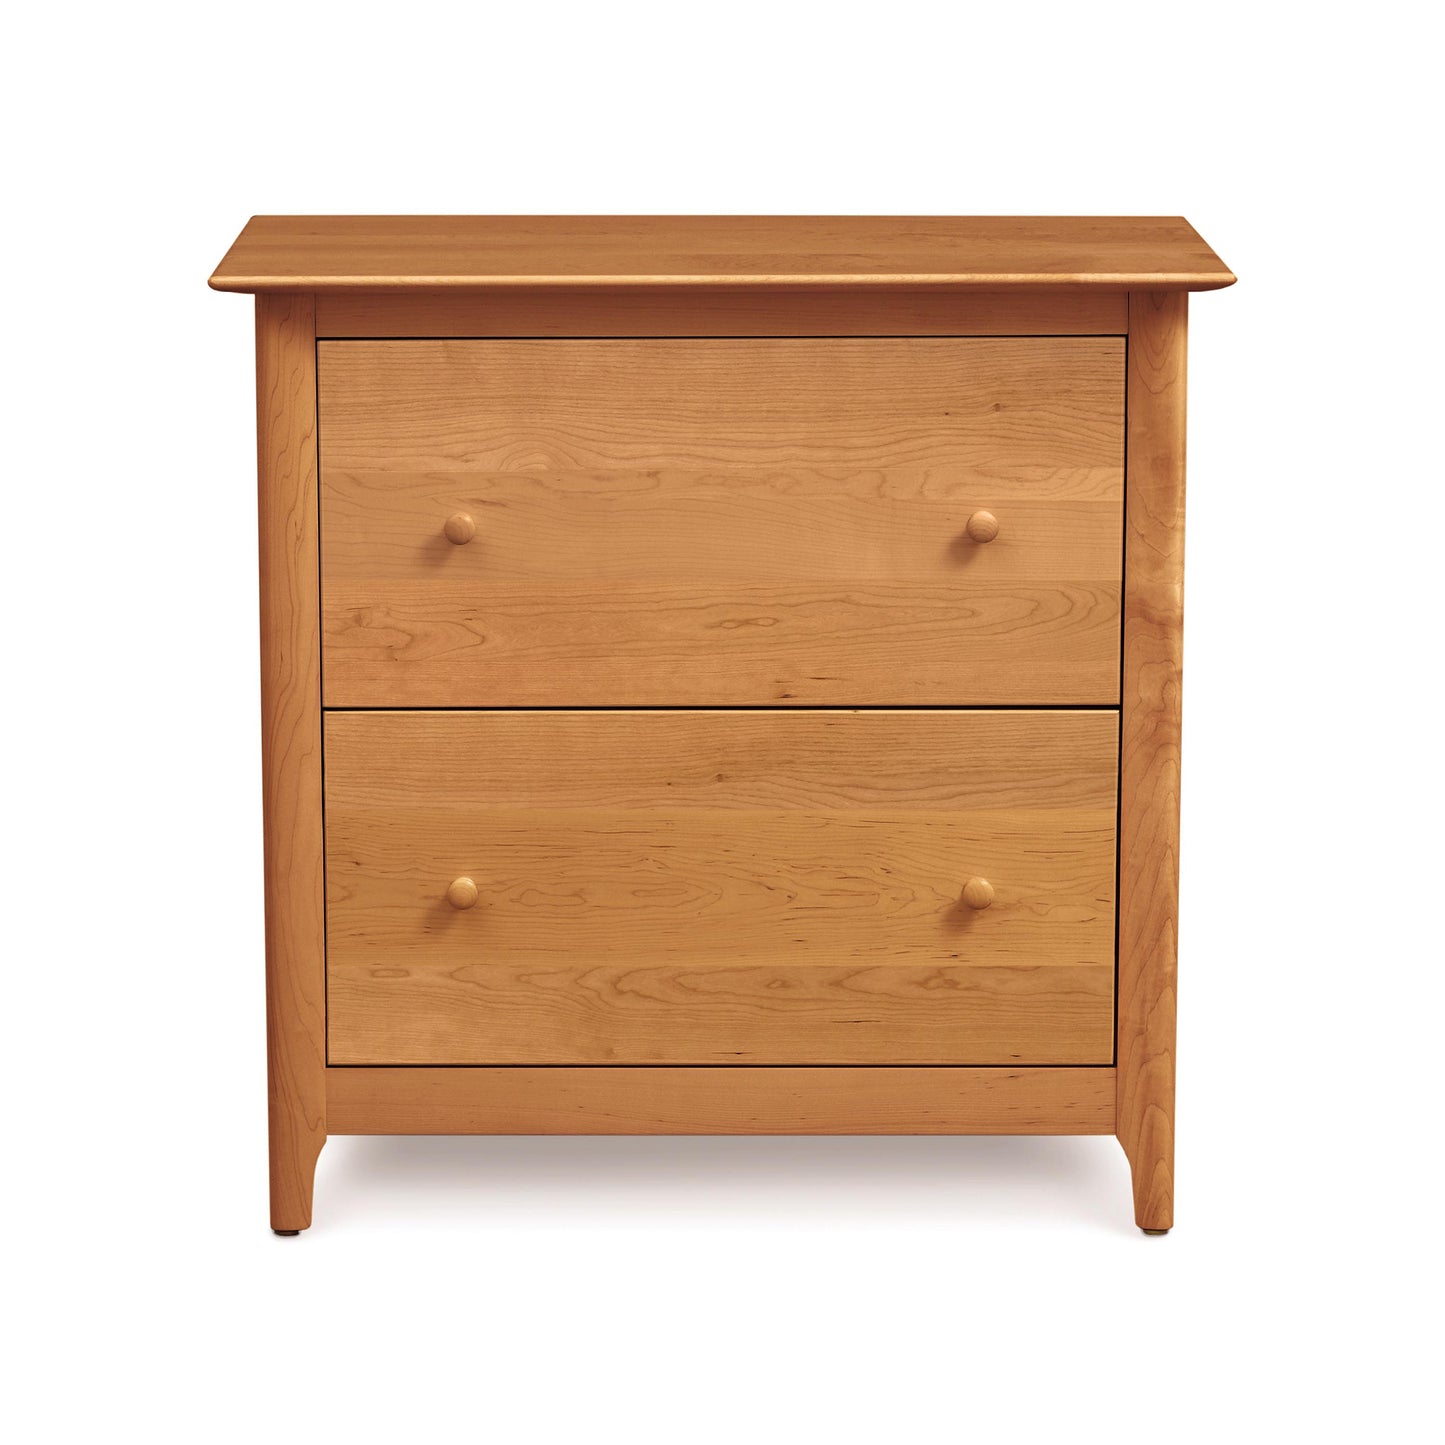 A Sarah Lateral Filing Cabinet from Copeland Furniture isolated on a white background.